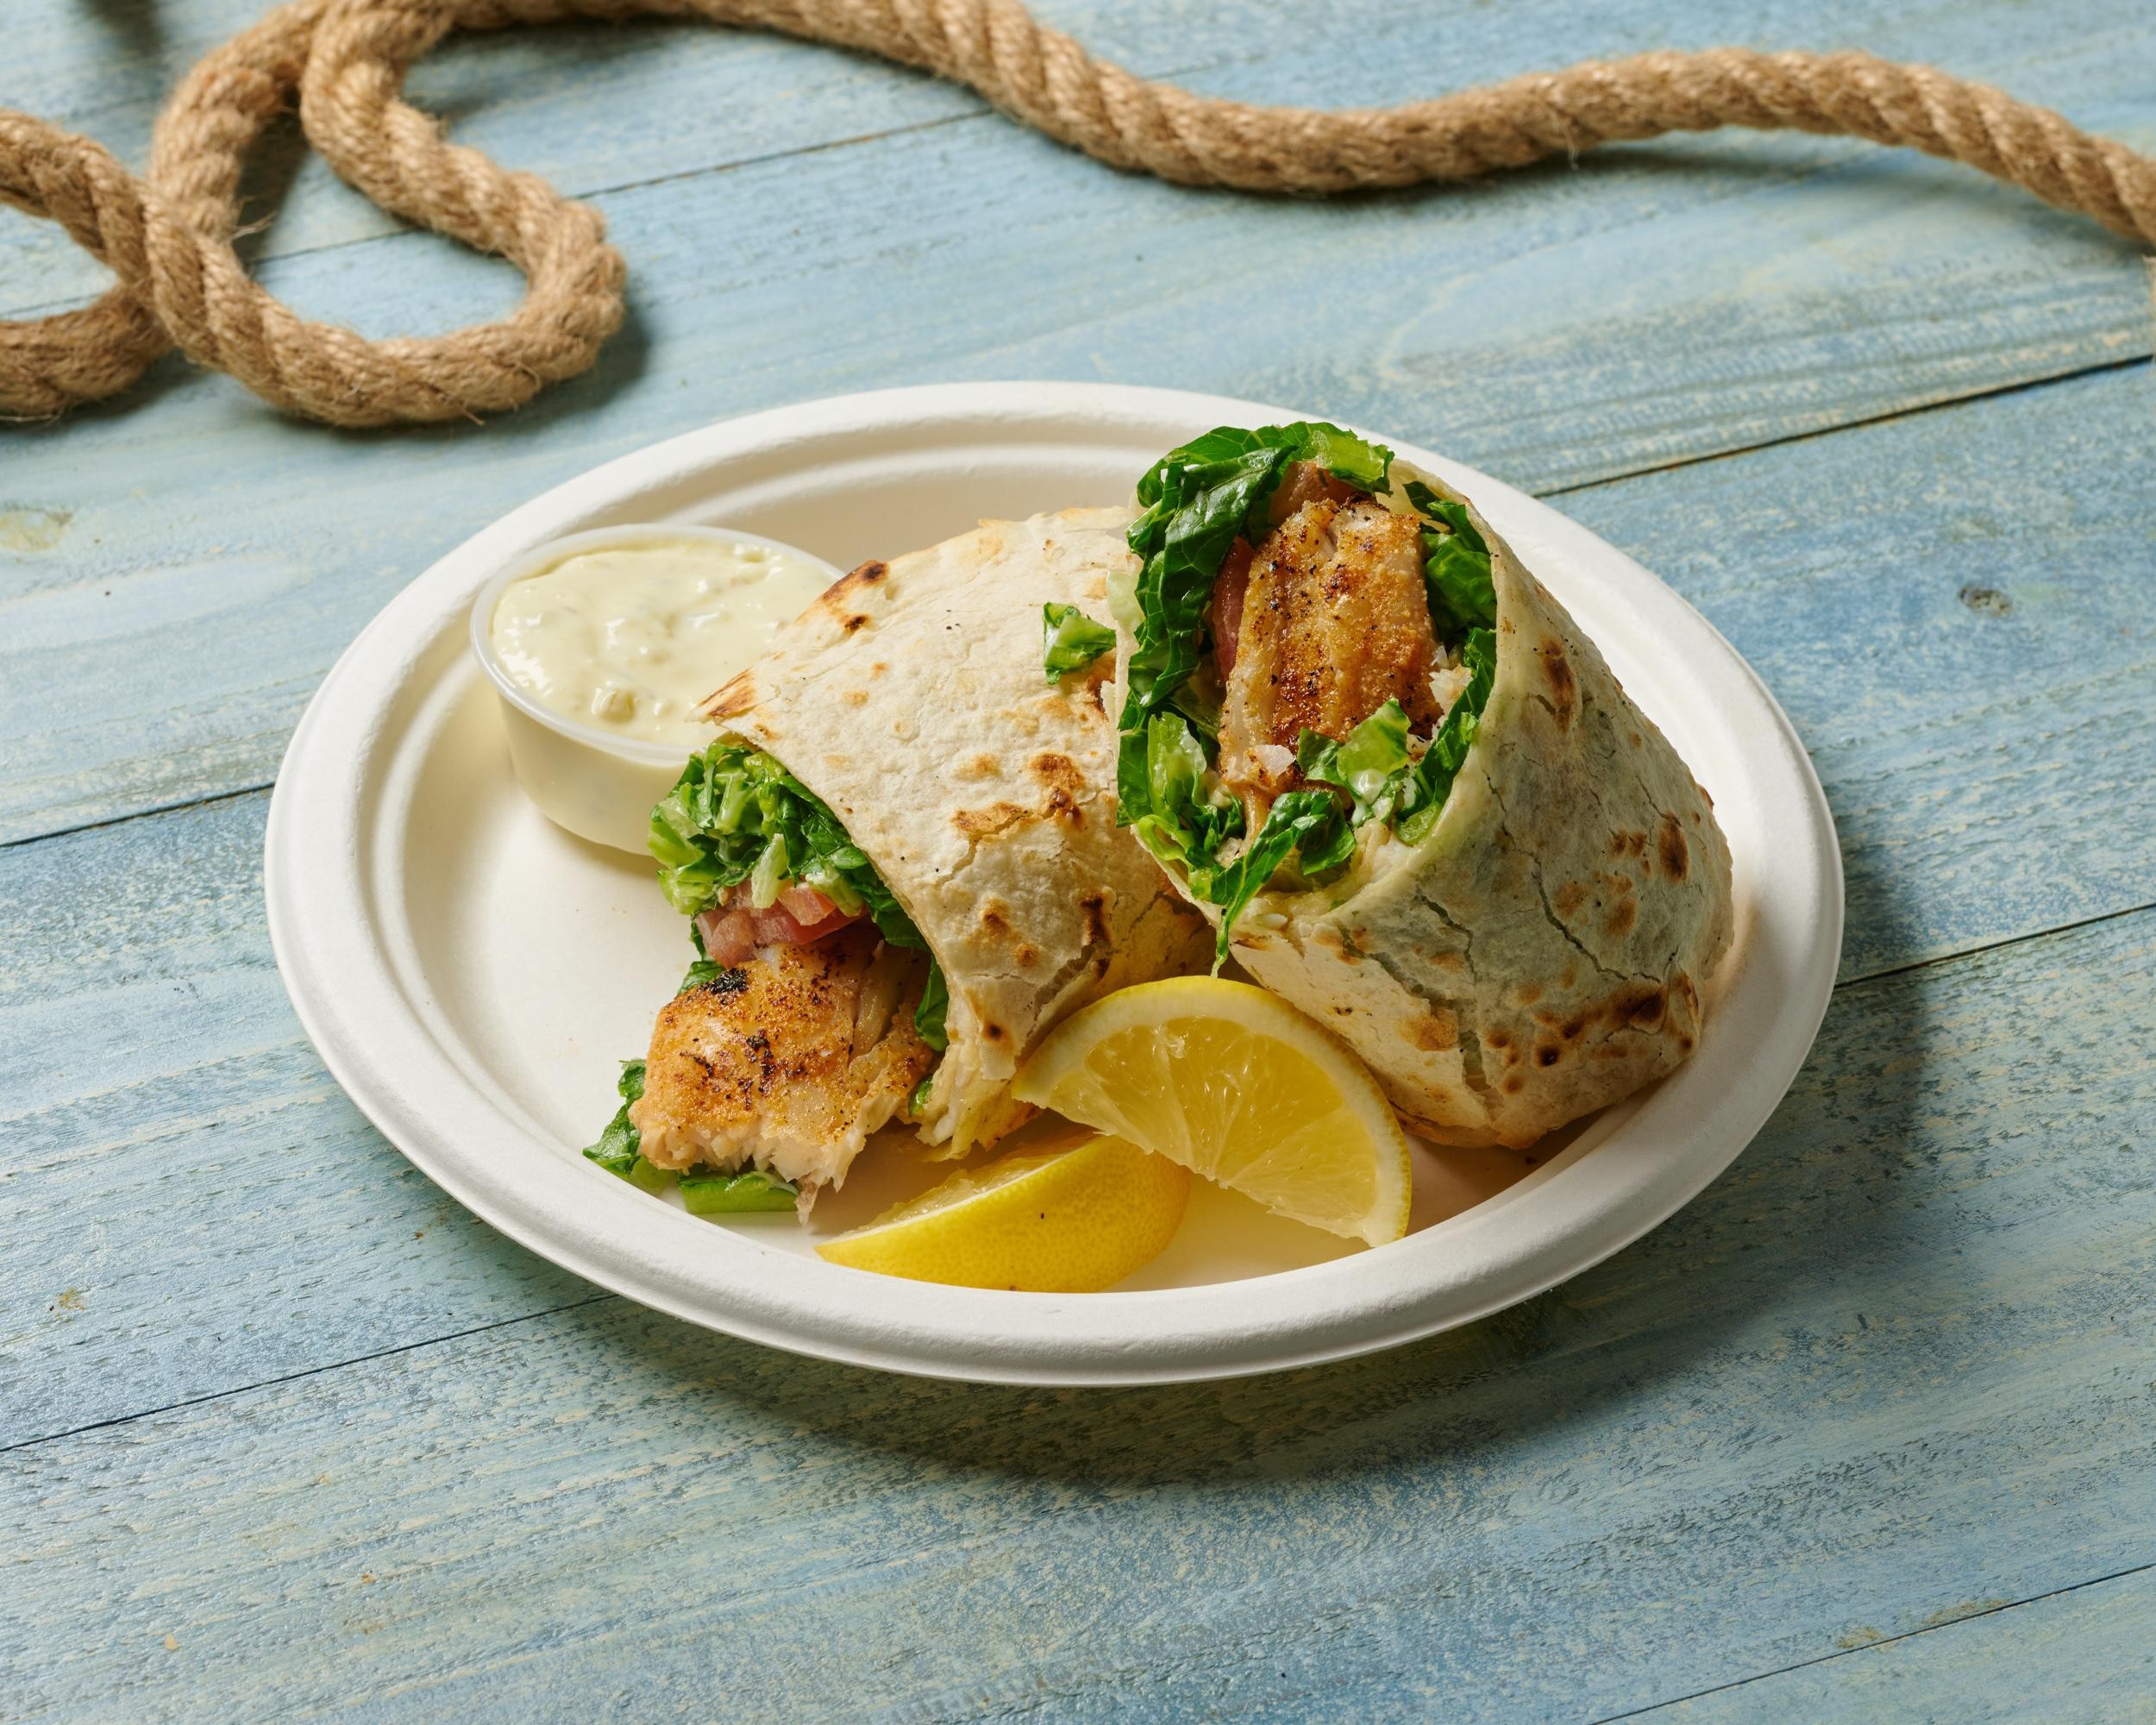 GRILLED FISH WRAP